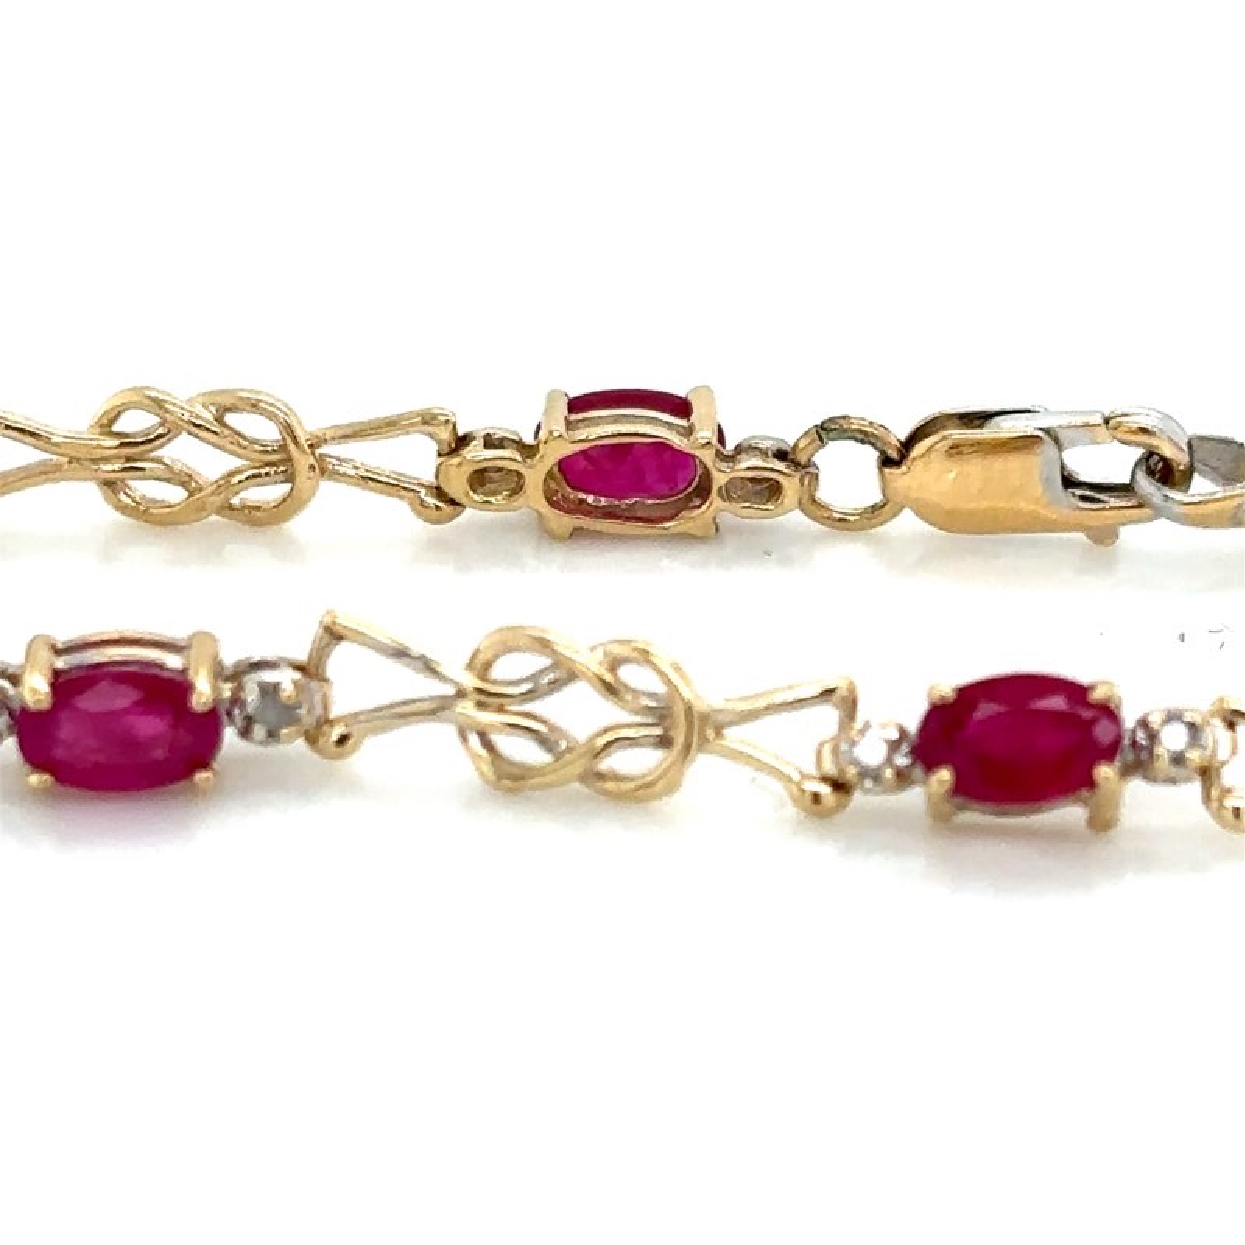 14K Yellow Gold Bracelet with Oval Rubies 2CT and Diamond .1CT Accents

7 Inch Bracelet